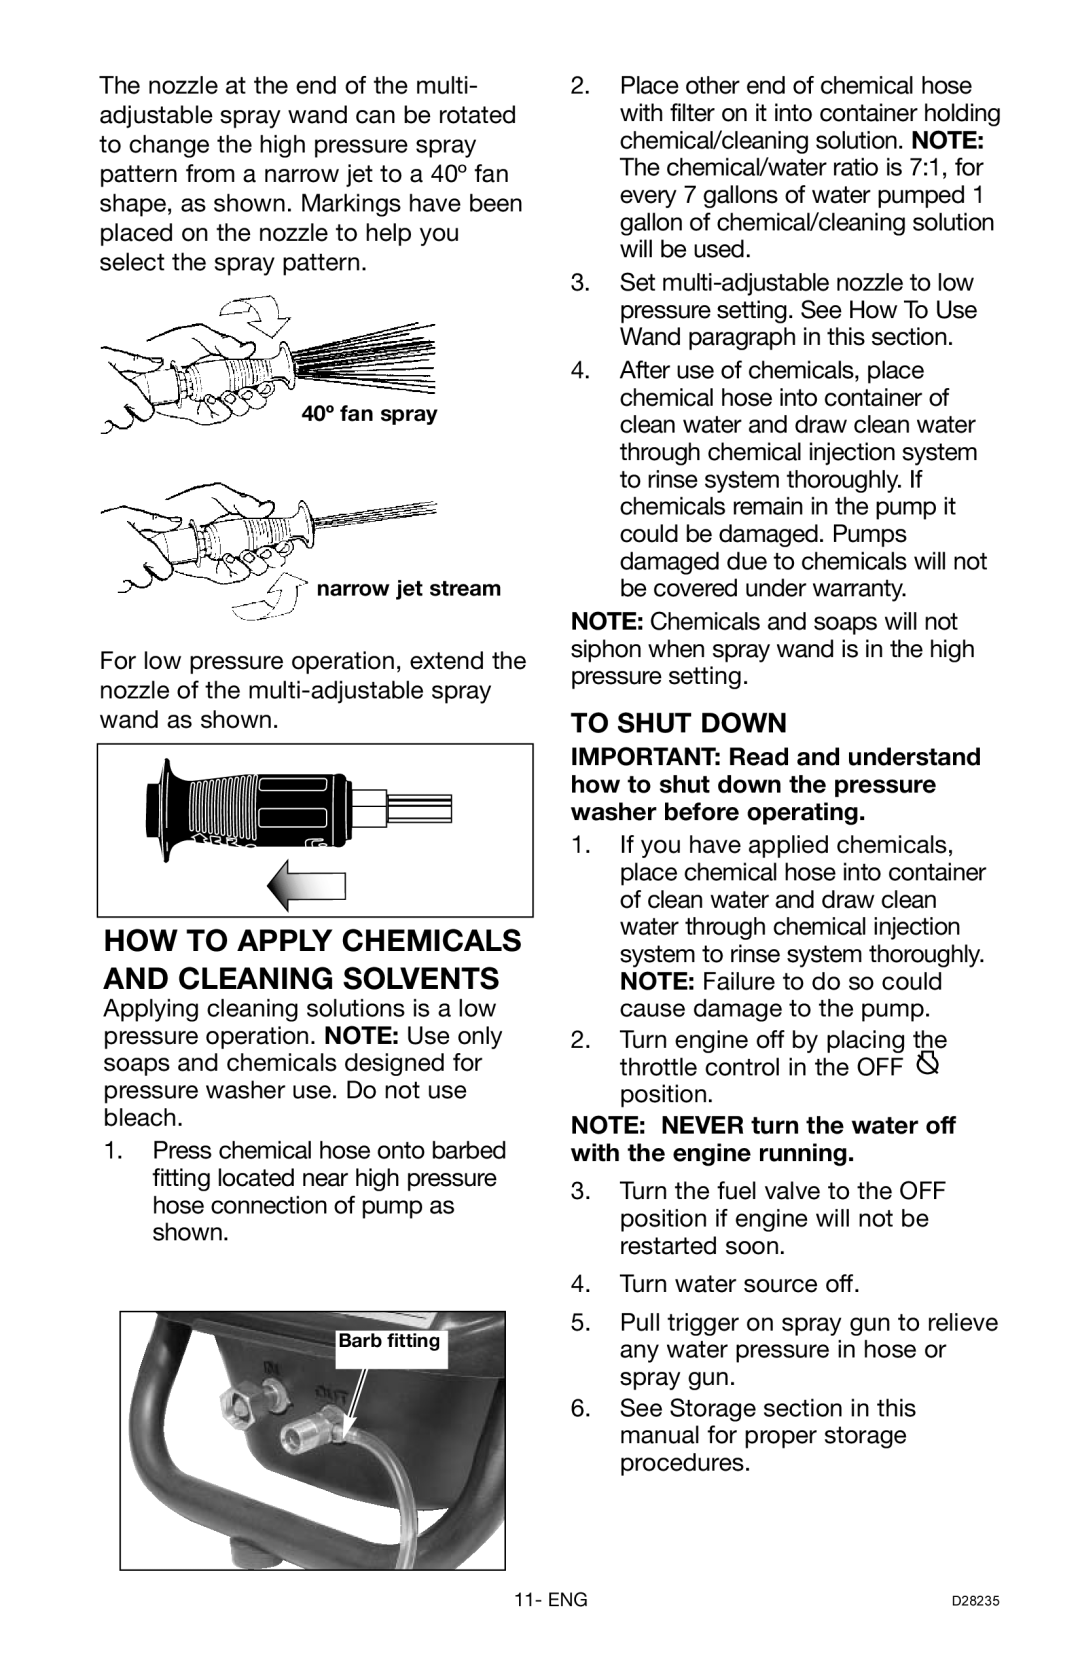 Craftsman 919.672241, D28235 owner manual How To Apply Chemicals And Cleaning Solvents, To Shut Down 